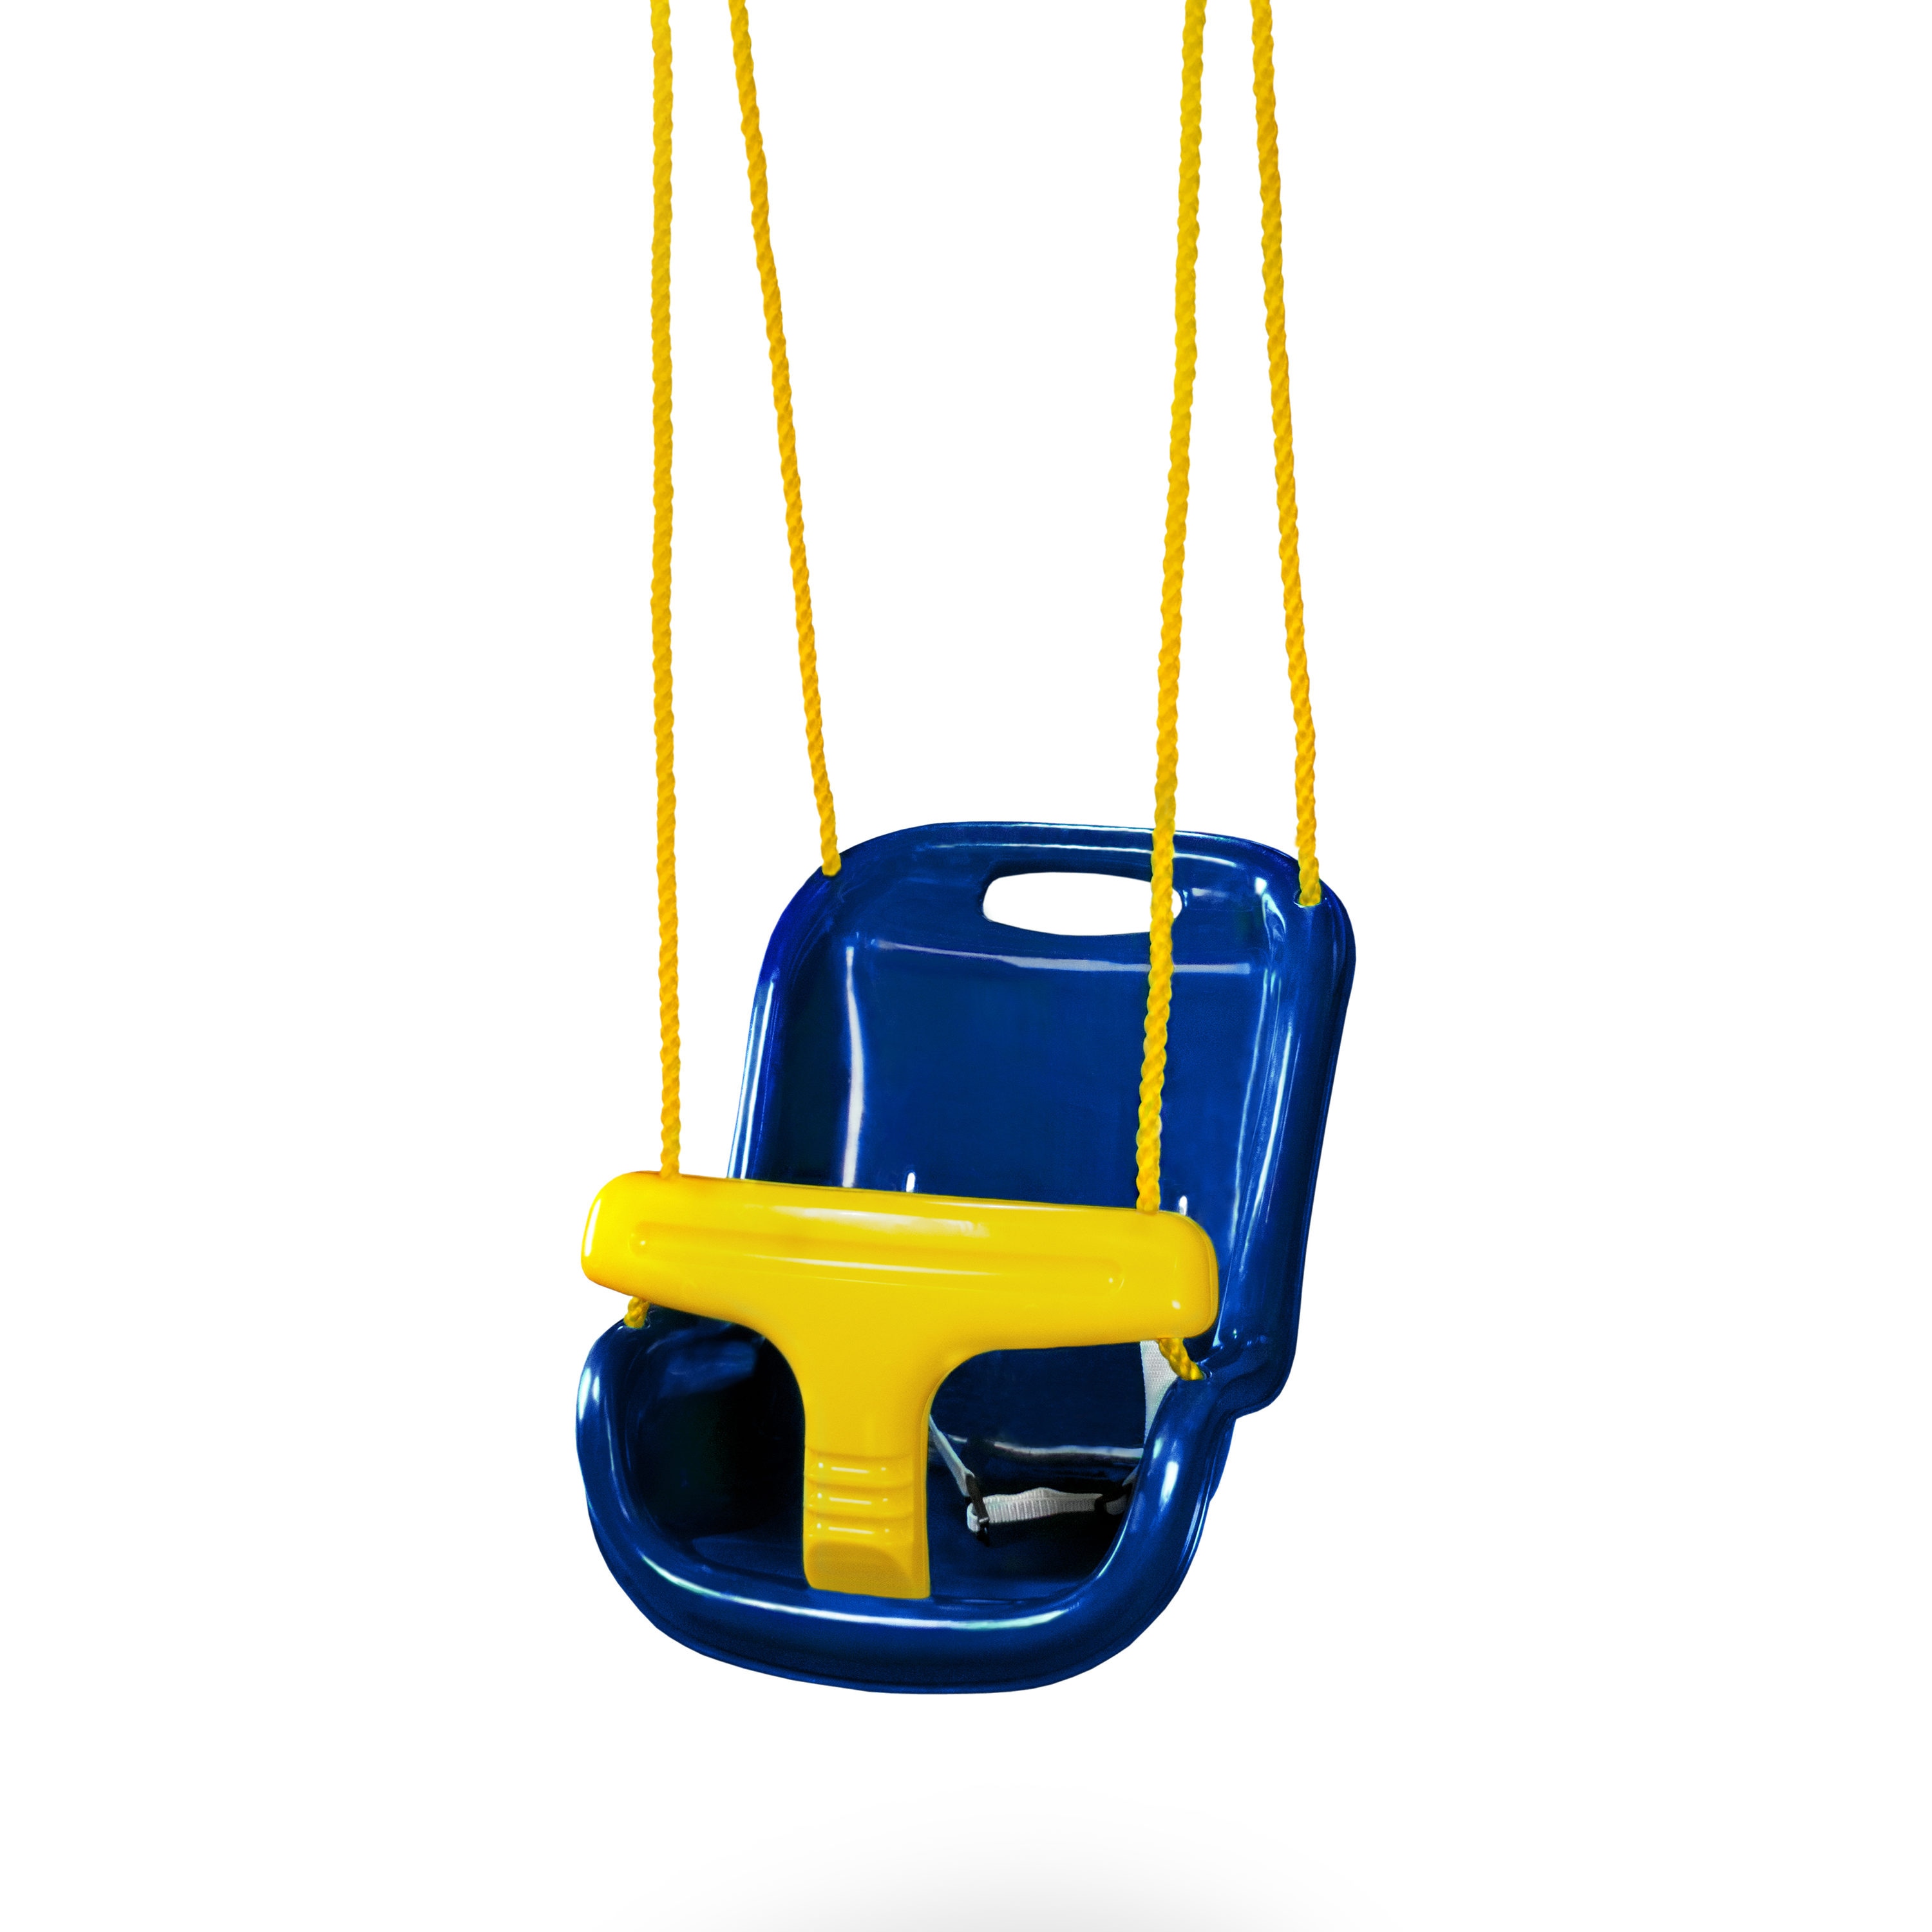 Toddler Infants to Teens High Back Full Bucket Heavy Duty Chain Detachable Playground Jungle Gym Secure Hanging Swing Seat Set for Children Sundlight 3 in 1 Swing Seat 